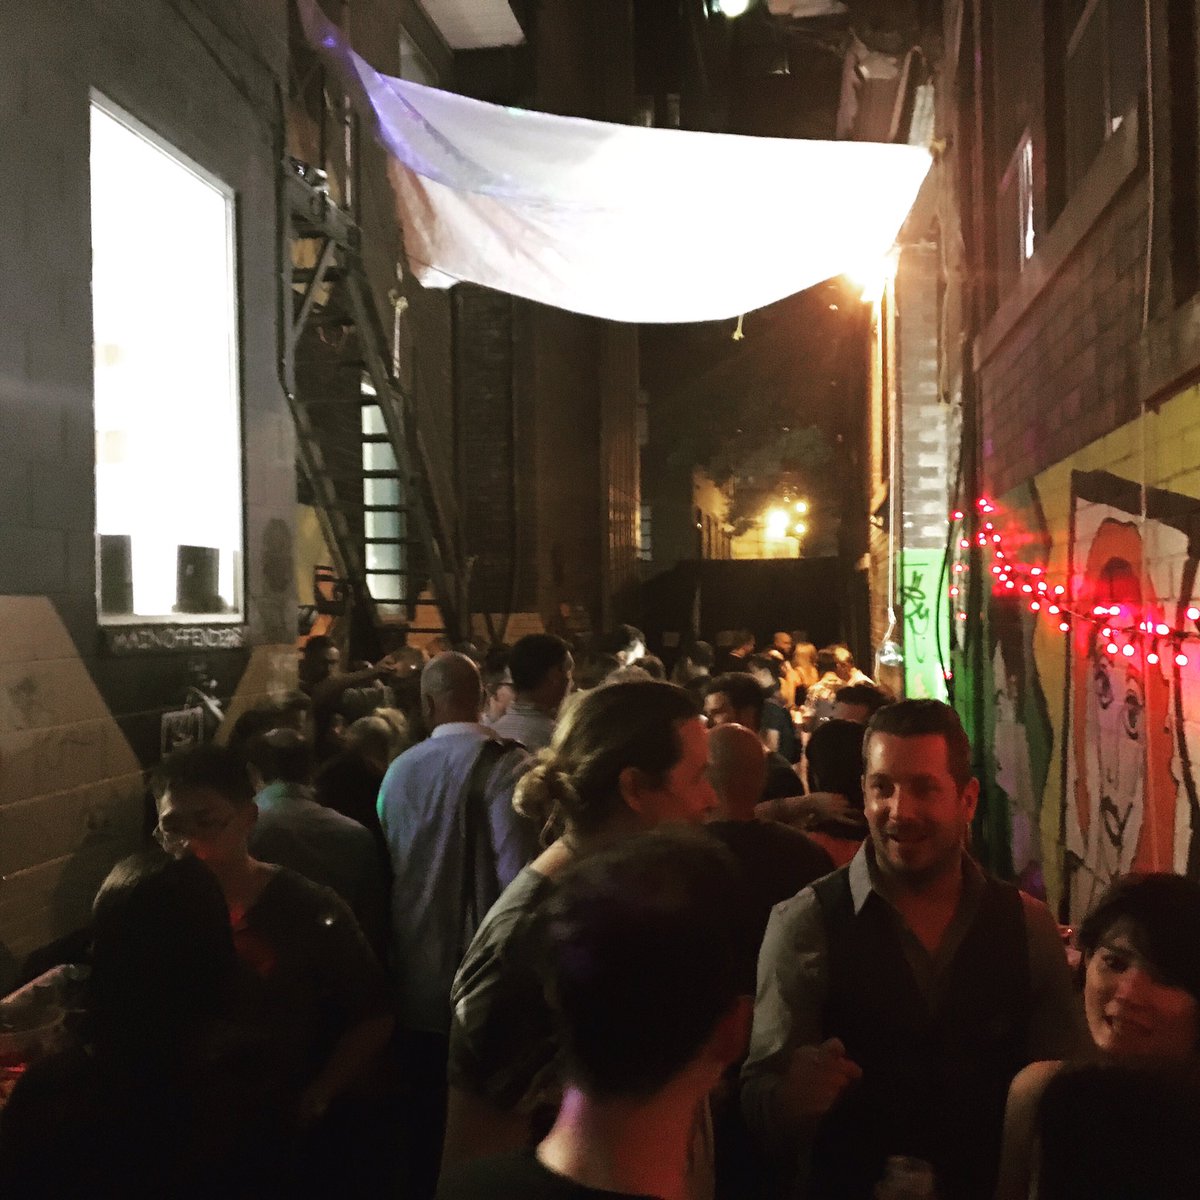 RT @ArchitectMi: @teeplearch summer alley party https://t.co/nxnzGTNQ2Z